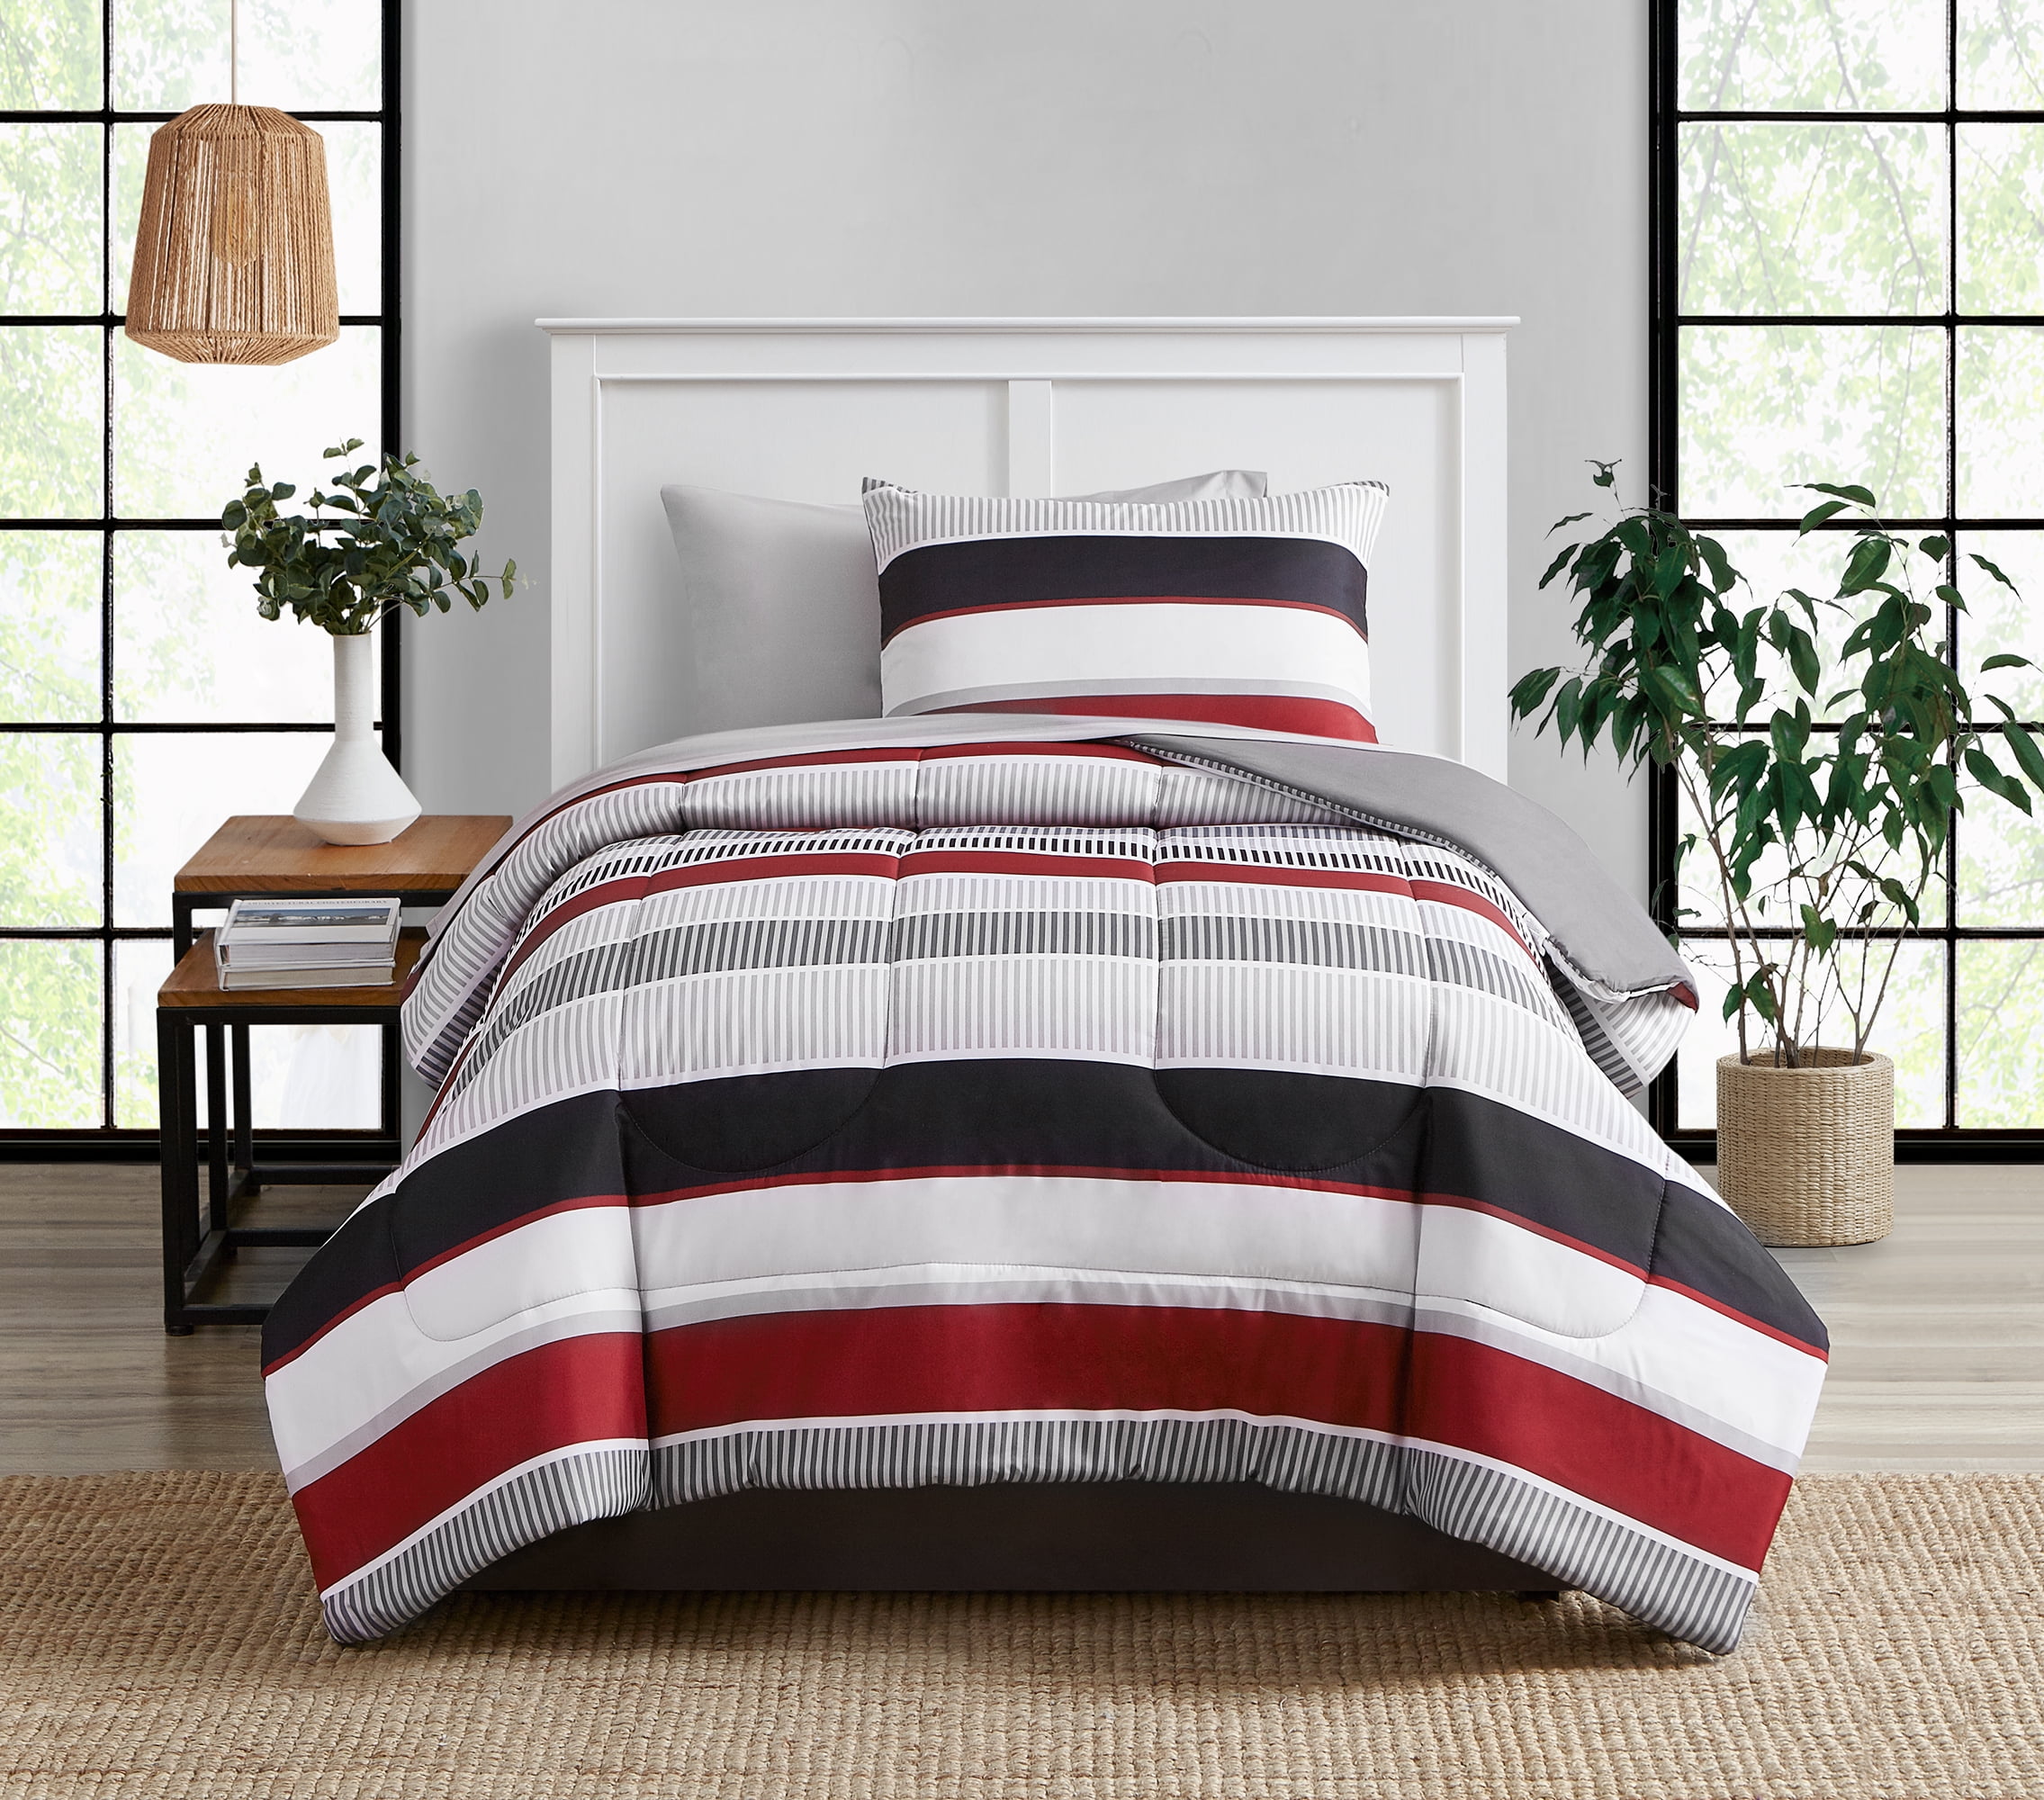 Mainstays Red Stripe 6 Piece Bed in a Bag Comforter Set With Sheets, Twin